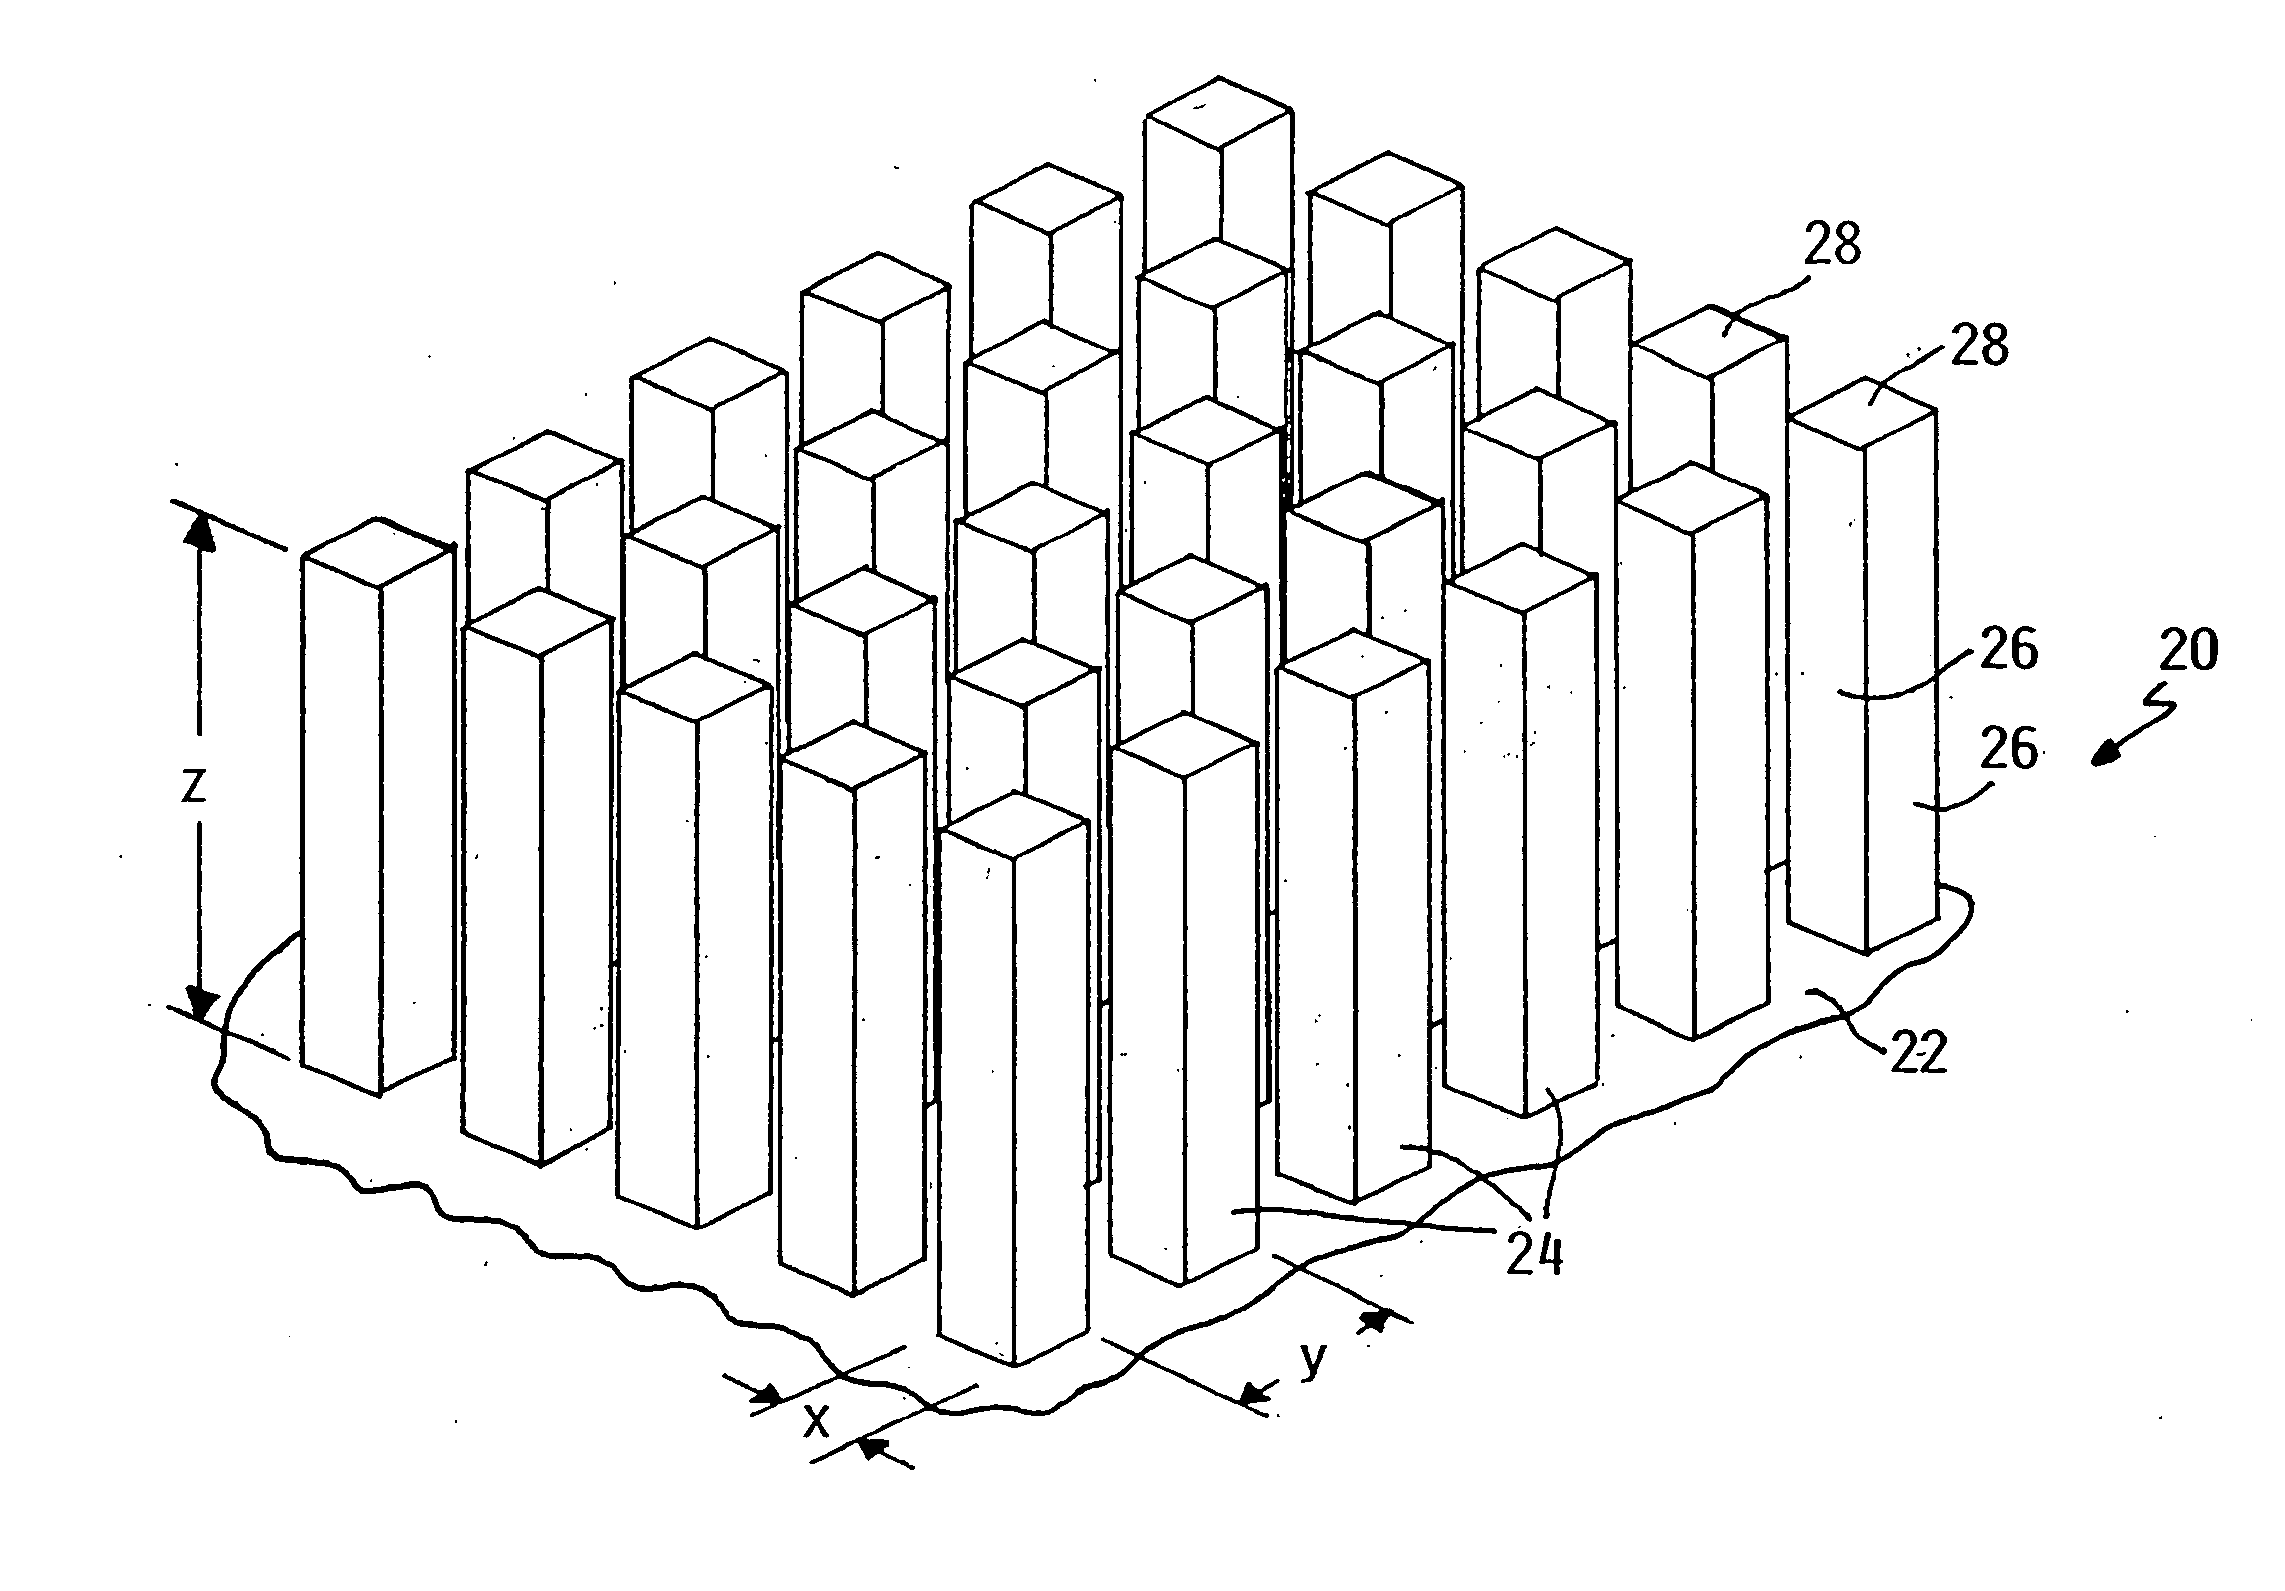 Fluid handling component with ultraphobic surfaces